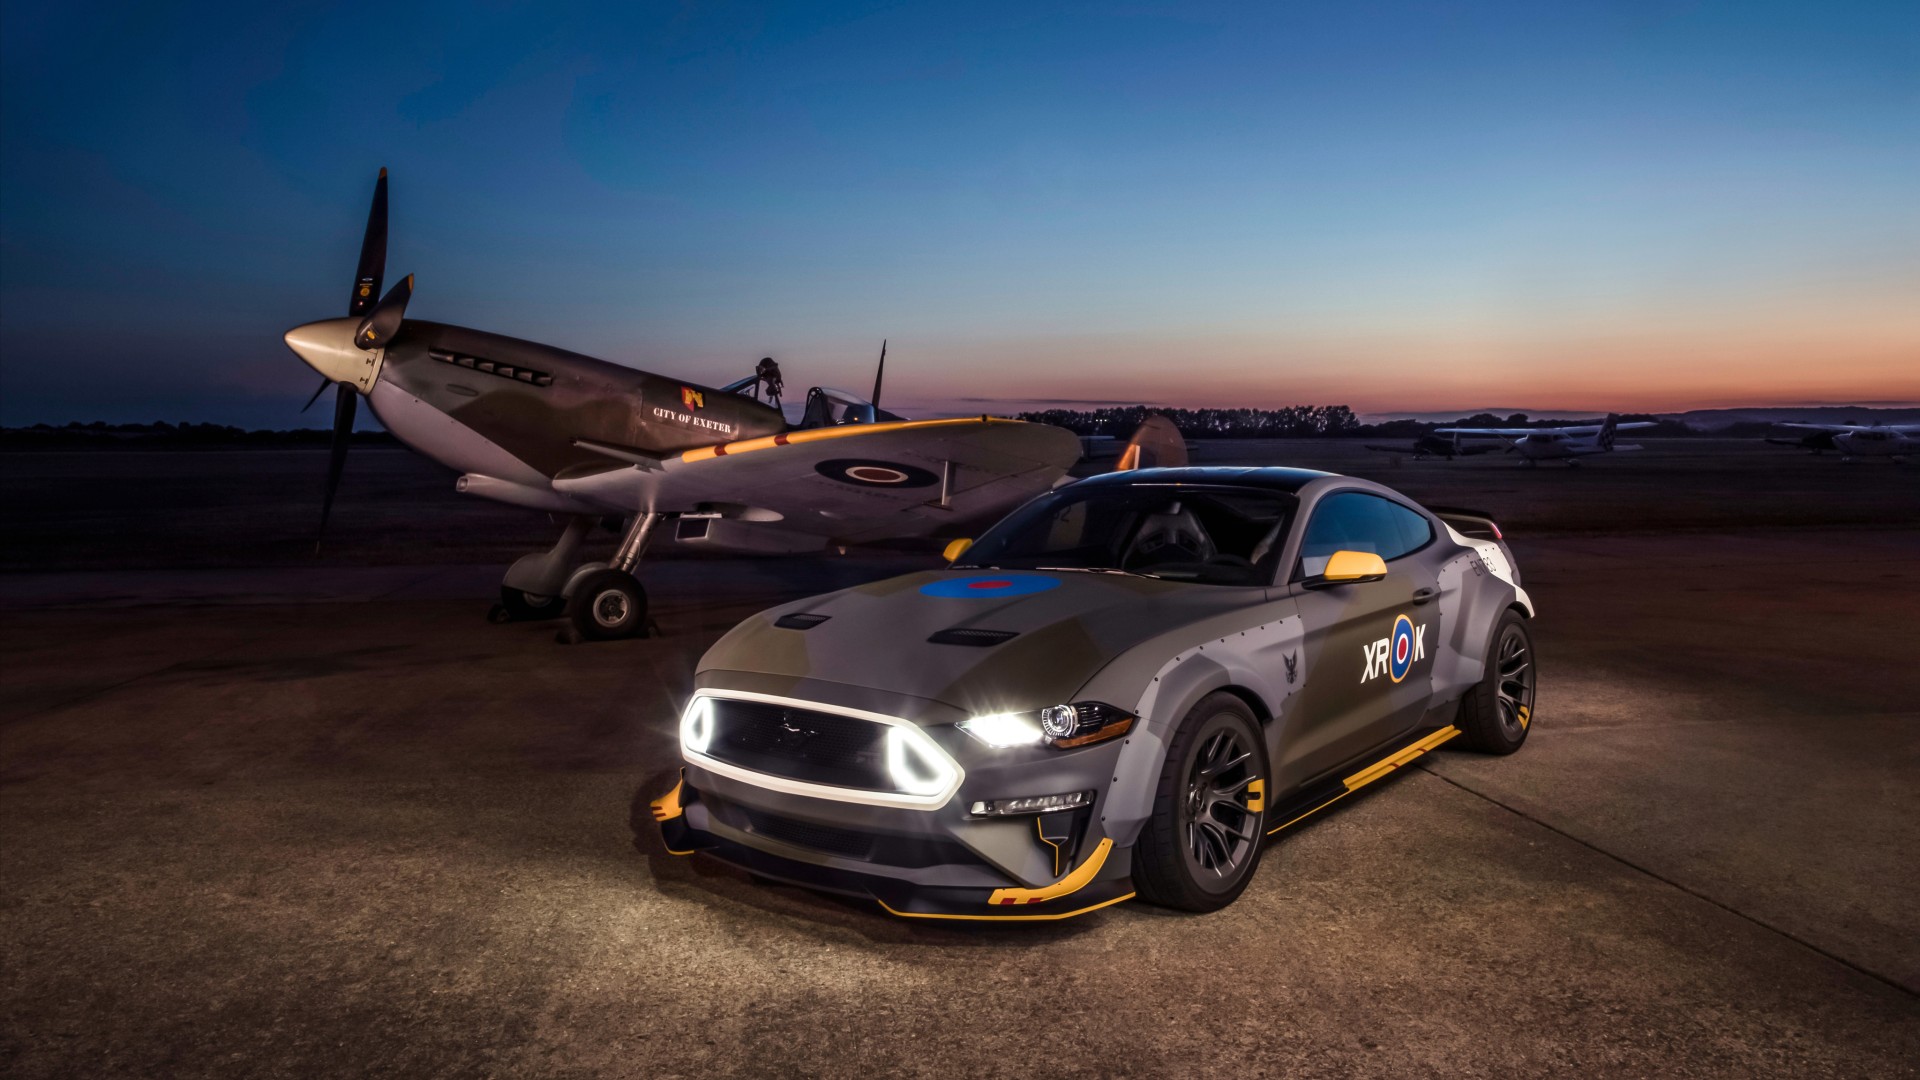 Ford Eagle Squadron Mustang GT 2018 4K 2 Wallpaper | HD Car Wallpapers